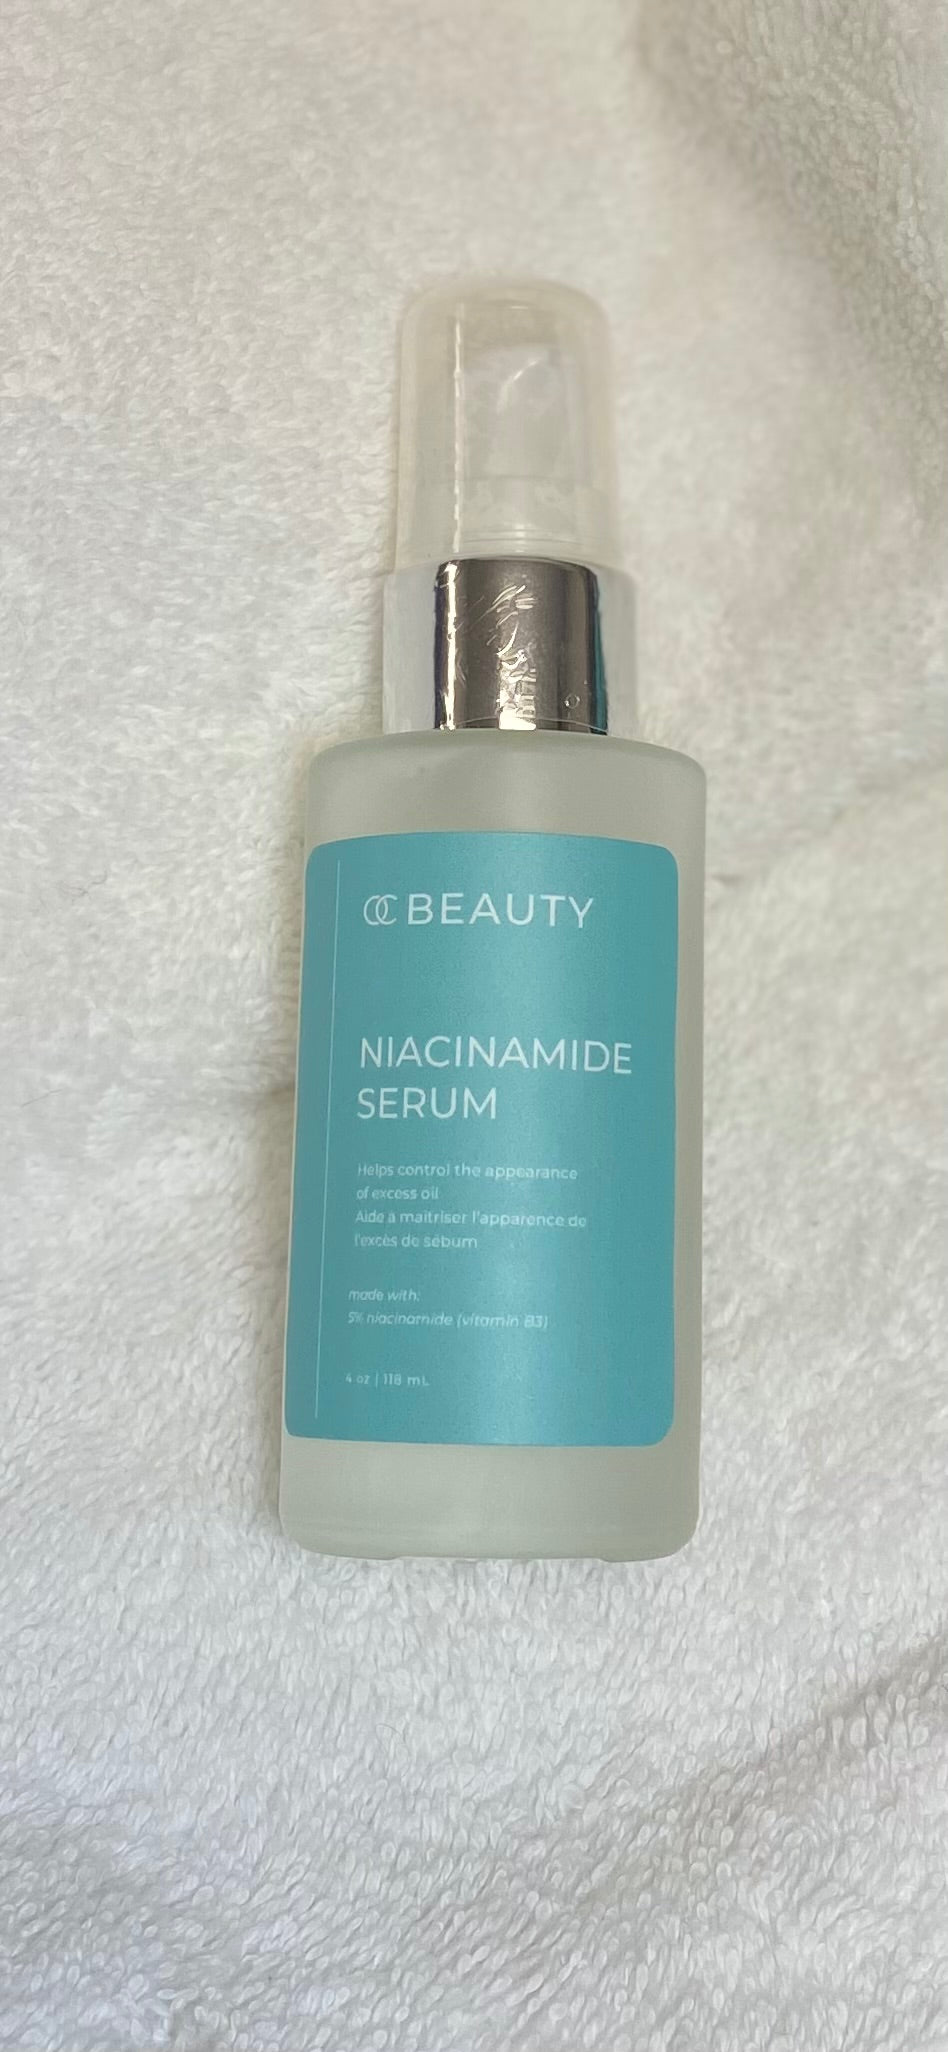 Unveiling Day 1 of our Advent Surprise: OC Beauty's 5% Niacinamide Serum!